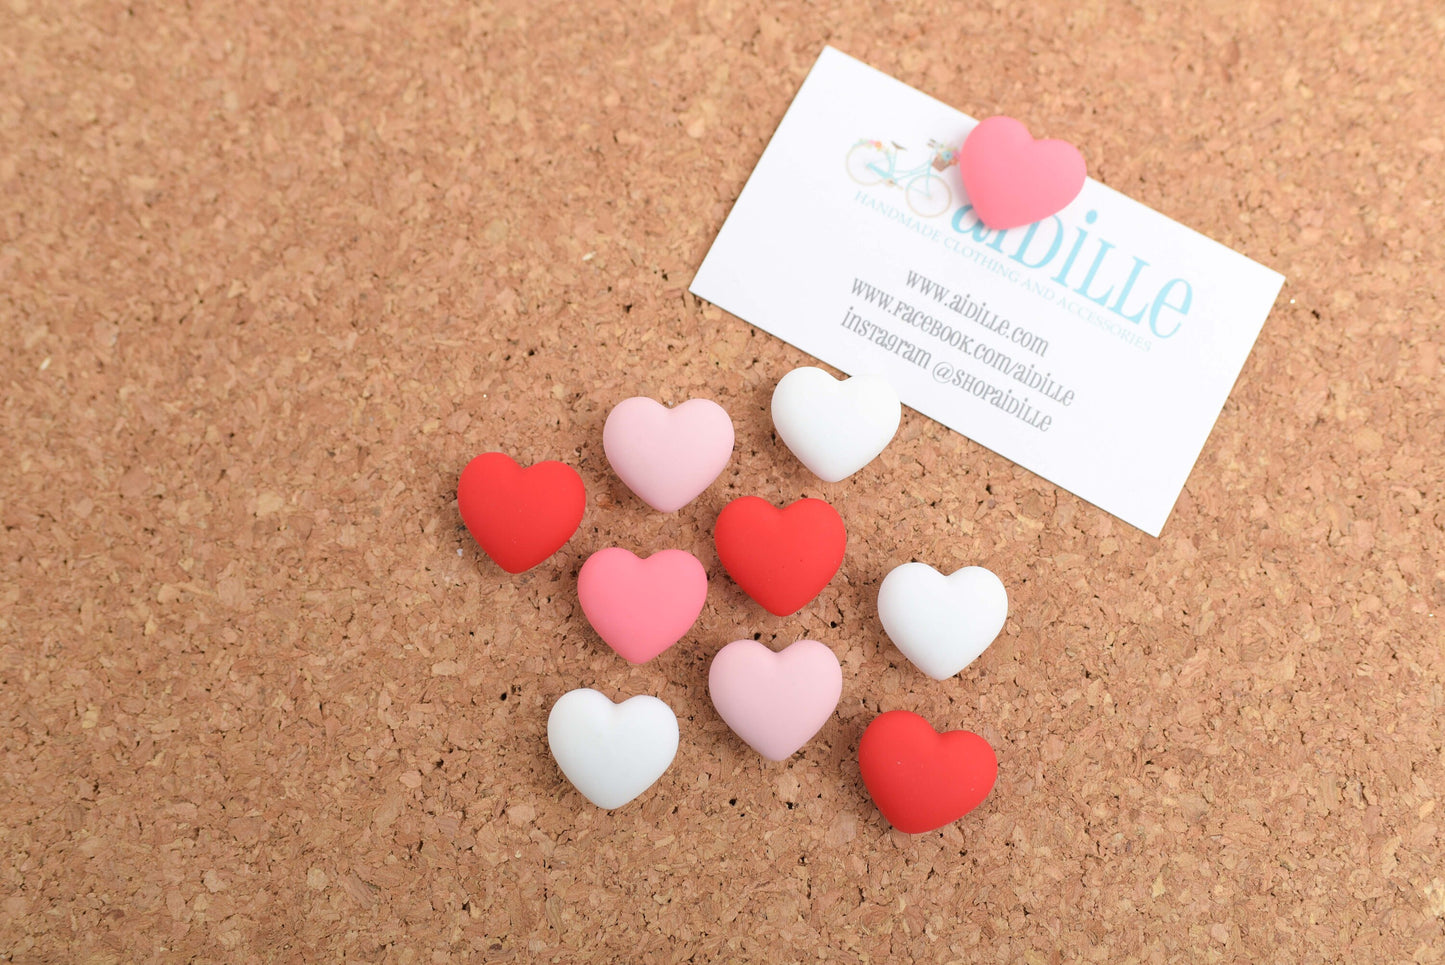 Puffy Heart Push Pins in Pink, Red, and White- Set of 10